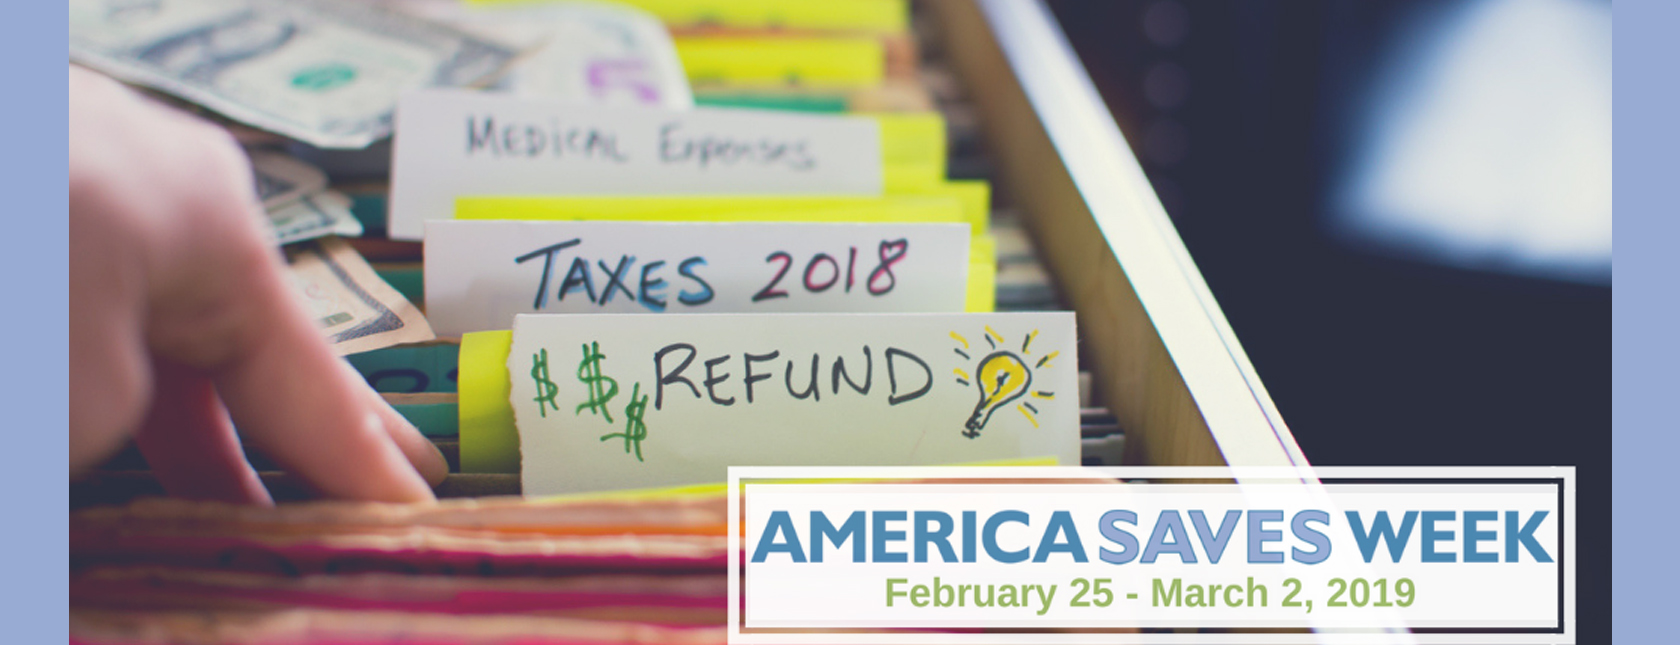 America Saves Week-make your refund work for you